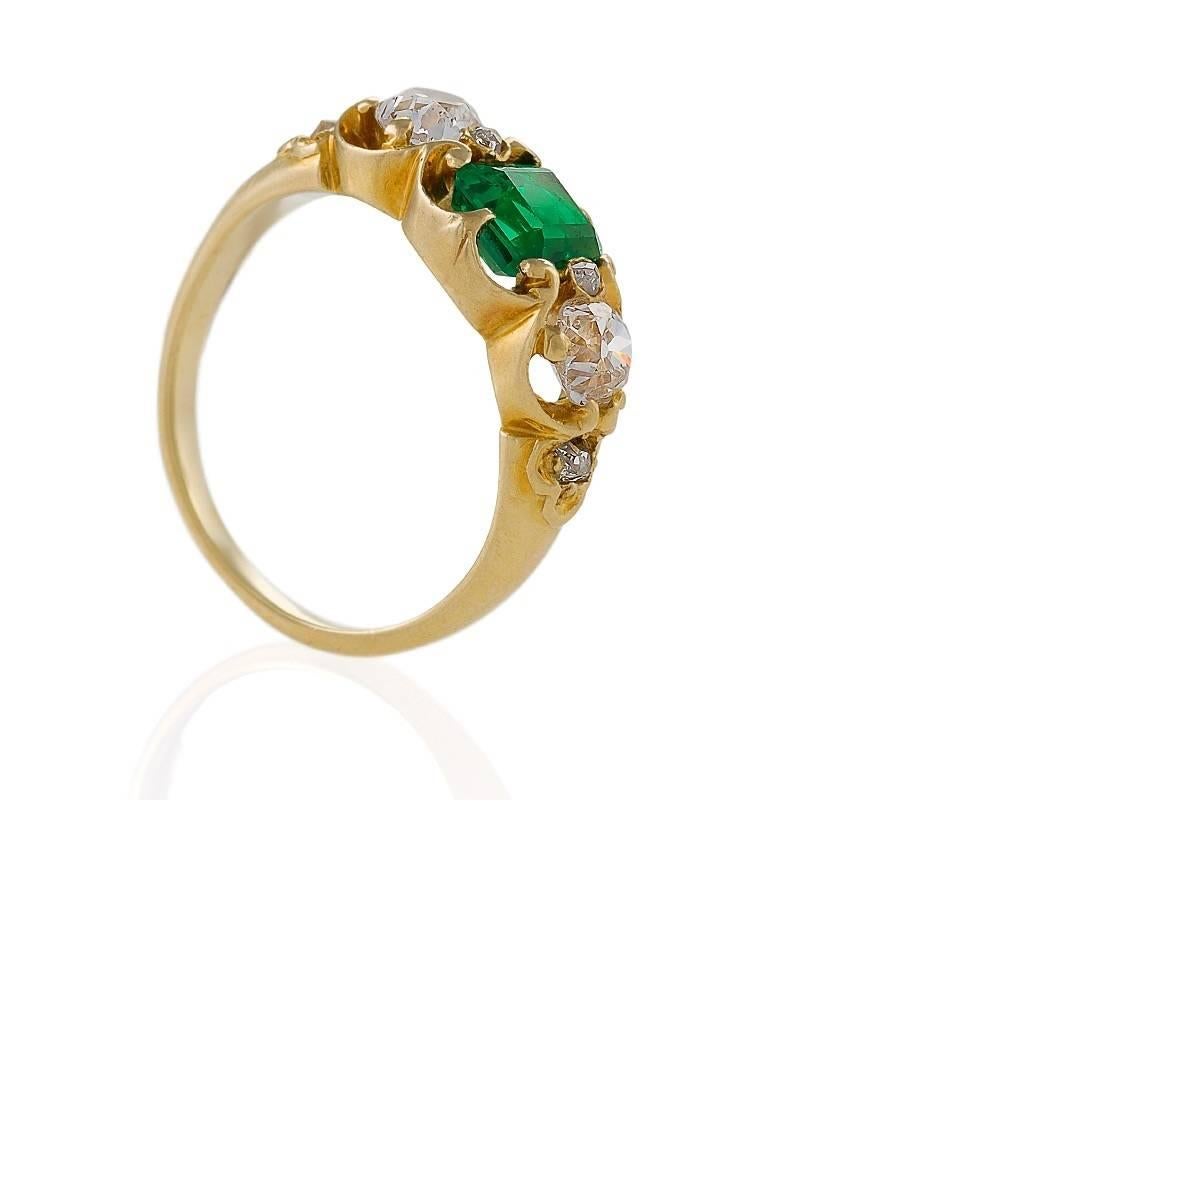 An Antique 18 karat yellow gold ring with emerald and diamonds. The ring has an emerald-cut emerald with an approximate total weight of .80 carat, and 4 old European-cut diamonds with an approximate total weight of .70 carat. The ring is designed in